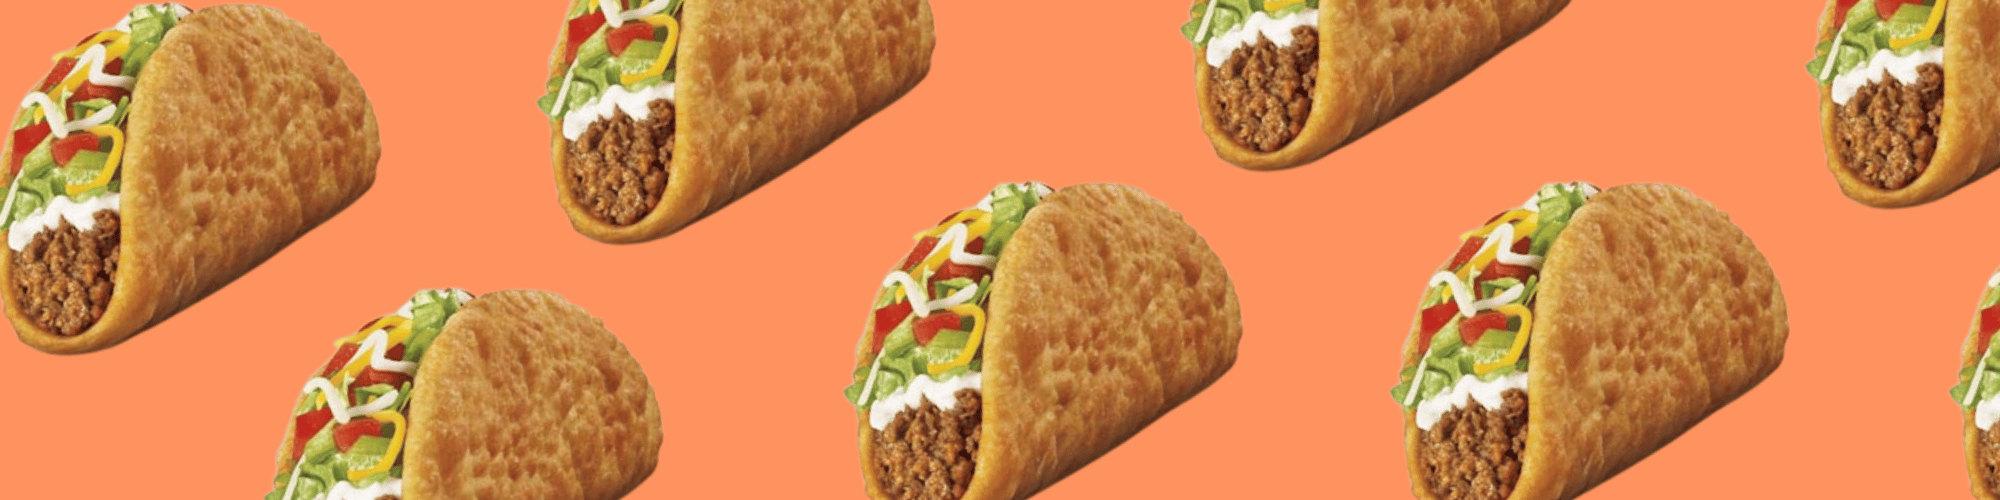 Taco Bell Partners with Delaget to Offer Optional Technical Solutions to Help Address Labor Shortages for its Franchisee Community